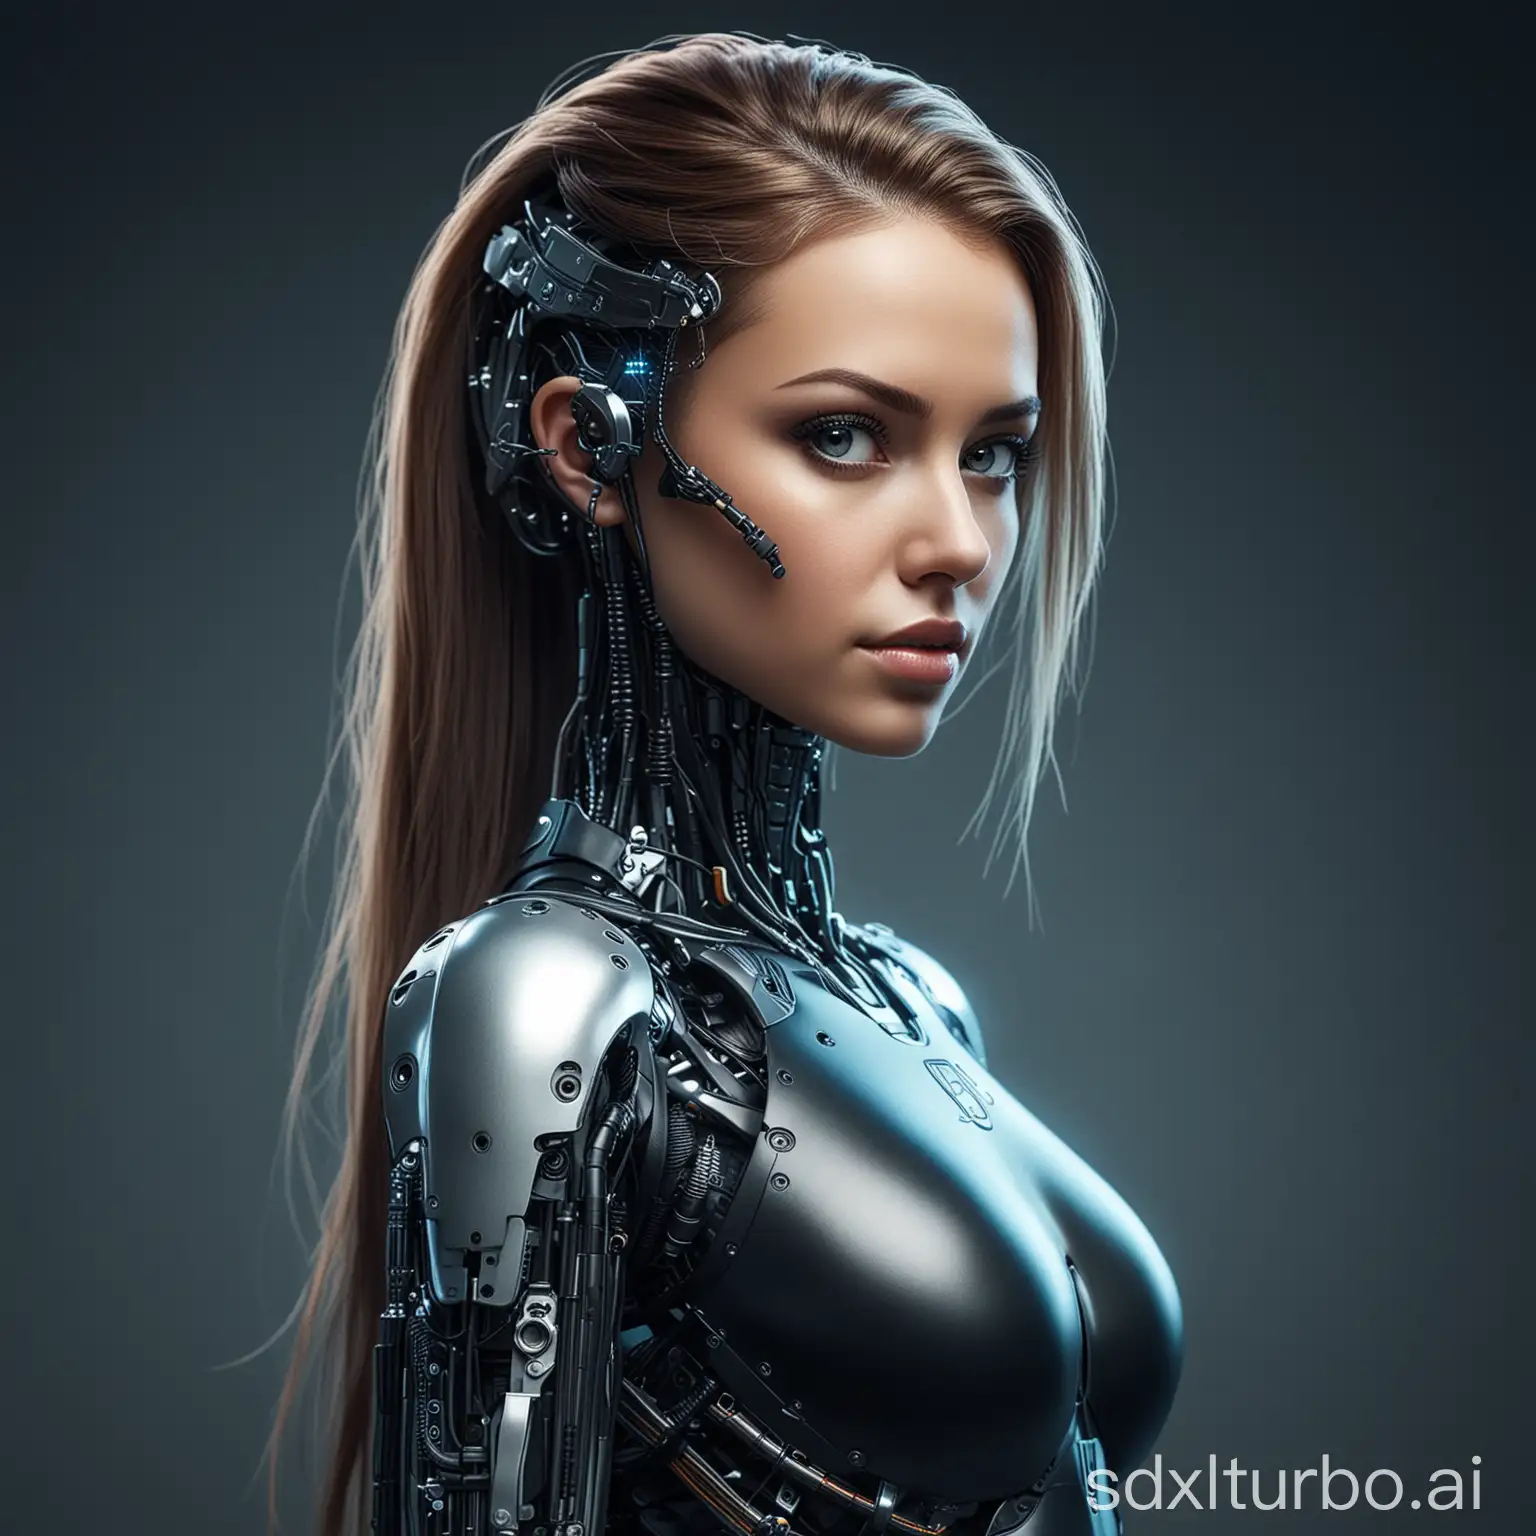 cybernetic style {A female hacker} . futuristic, technological, cybernetic enhancements, robotics, artificial intelligence themes